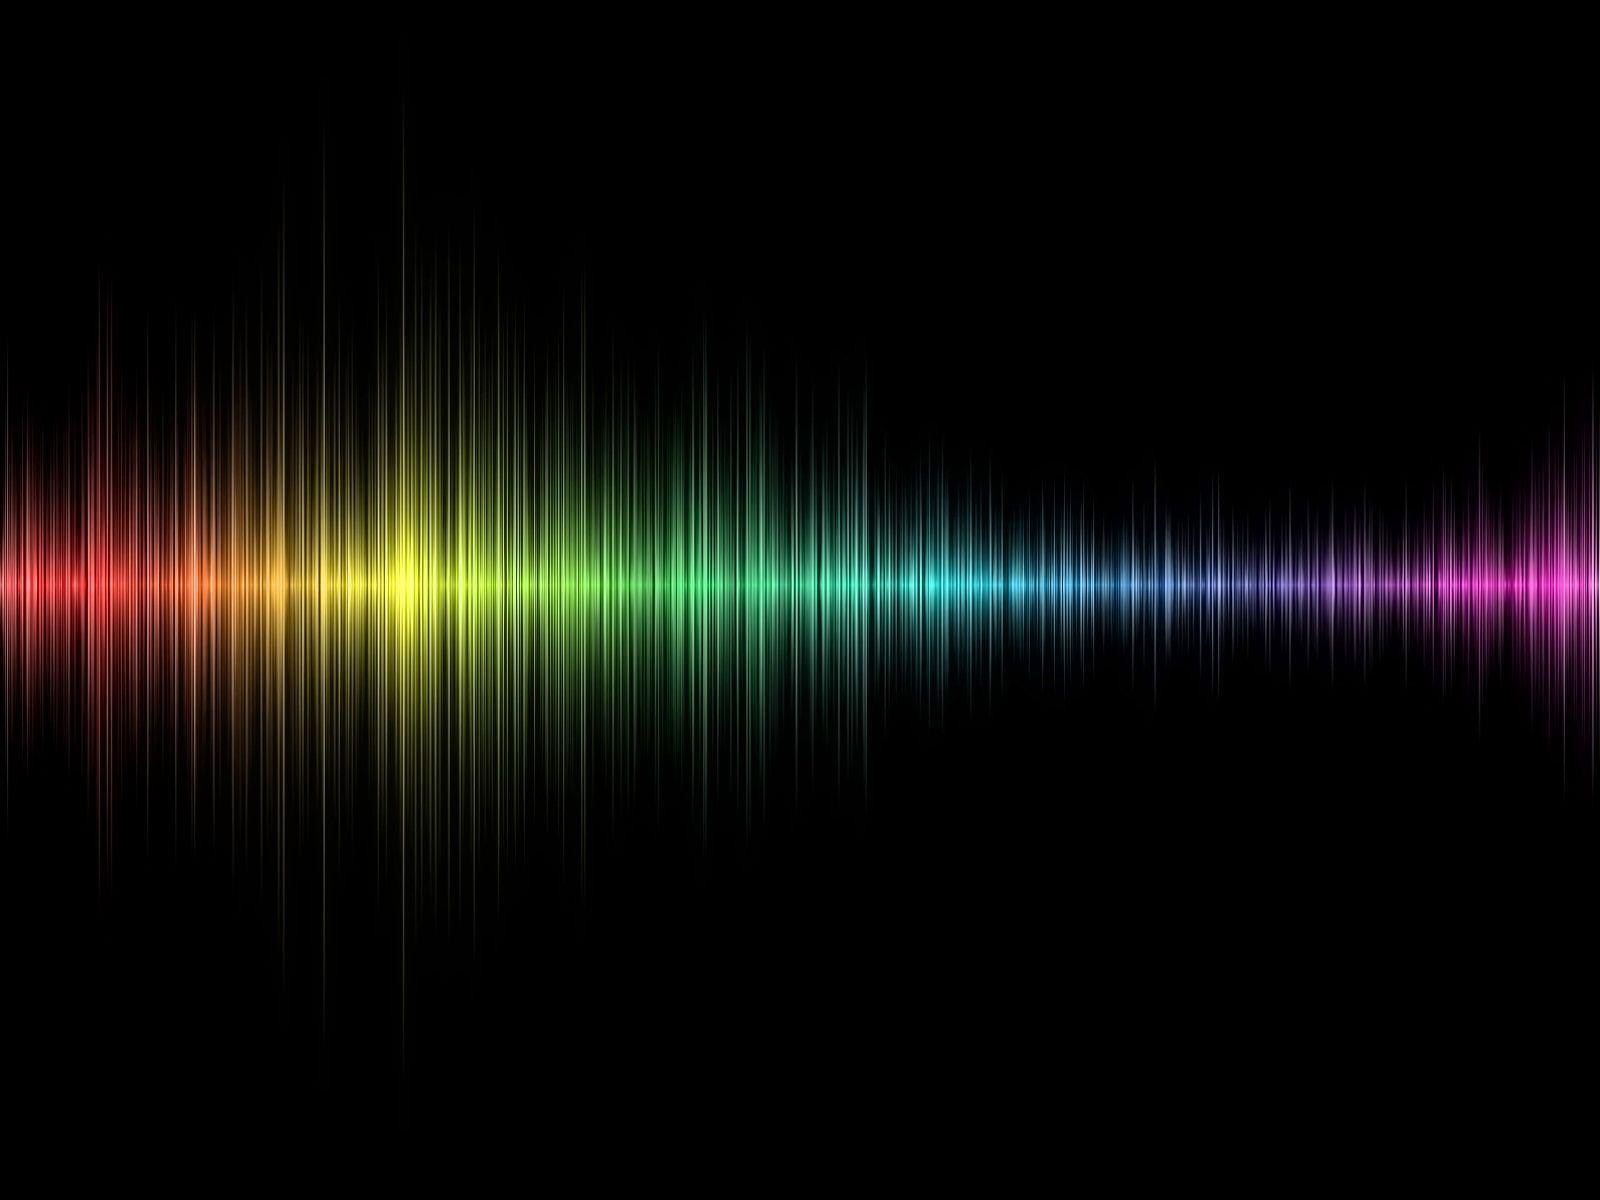 Wallpaper For > Cool Sound Waves Wallpaper. Waves wallpaper, Black and purple wallpaper, Music wallpaper